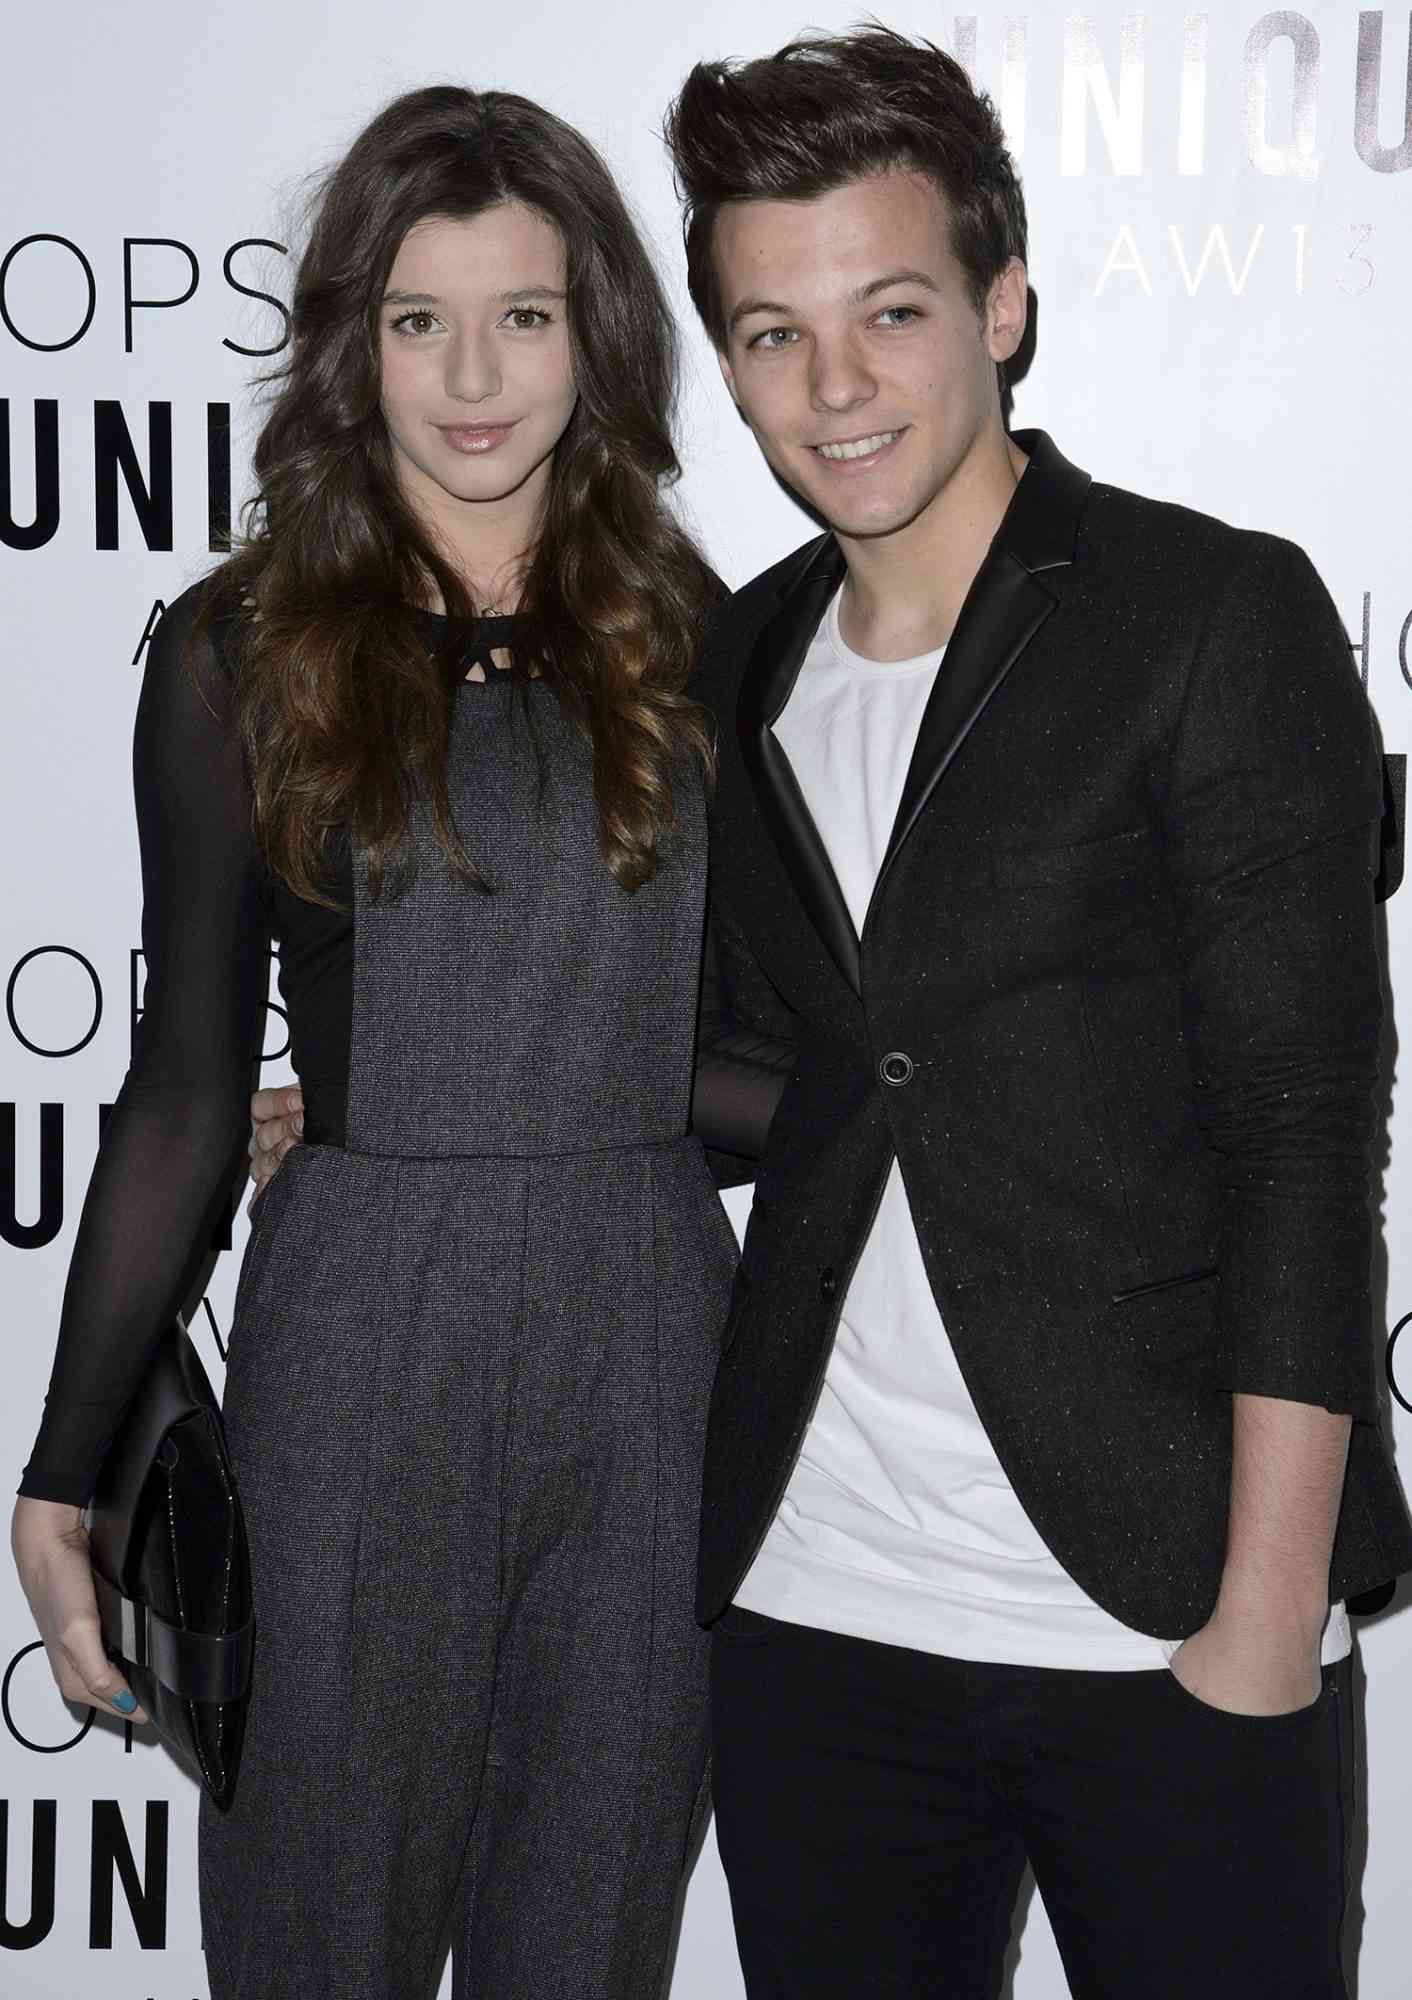 Eleanor Calder and Louis Tomlinson of One Direction attends the Topshop Unique Autumn/ Winter 2013 catwalk show